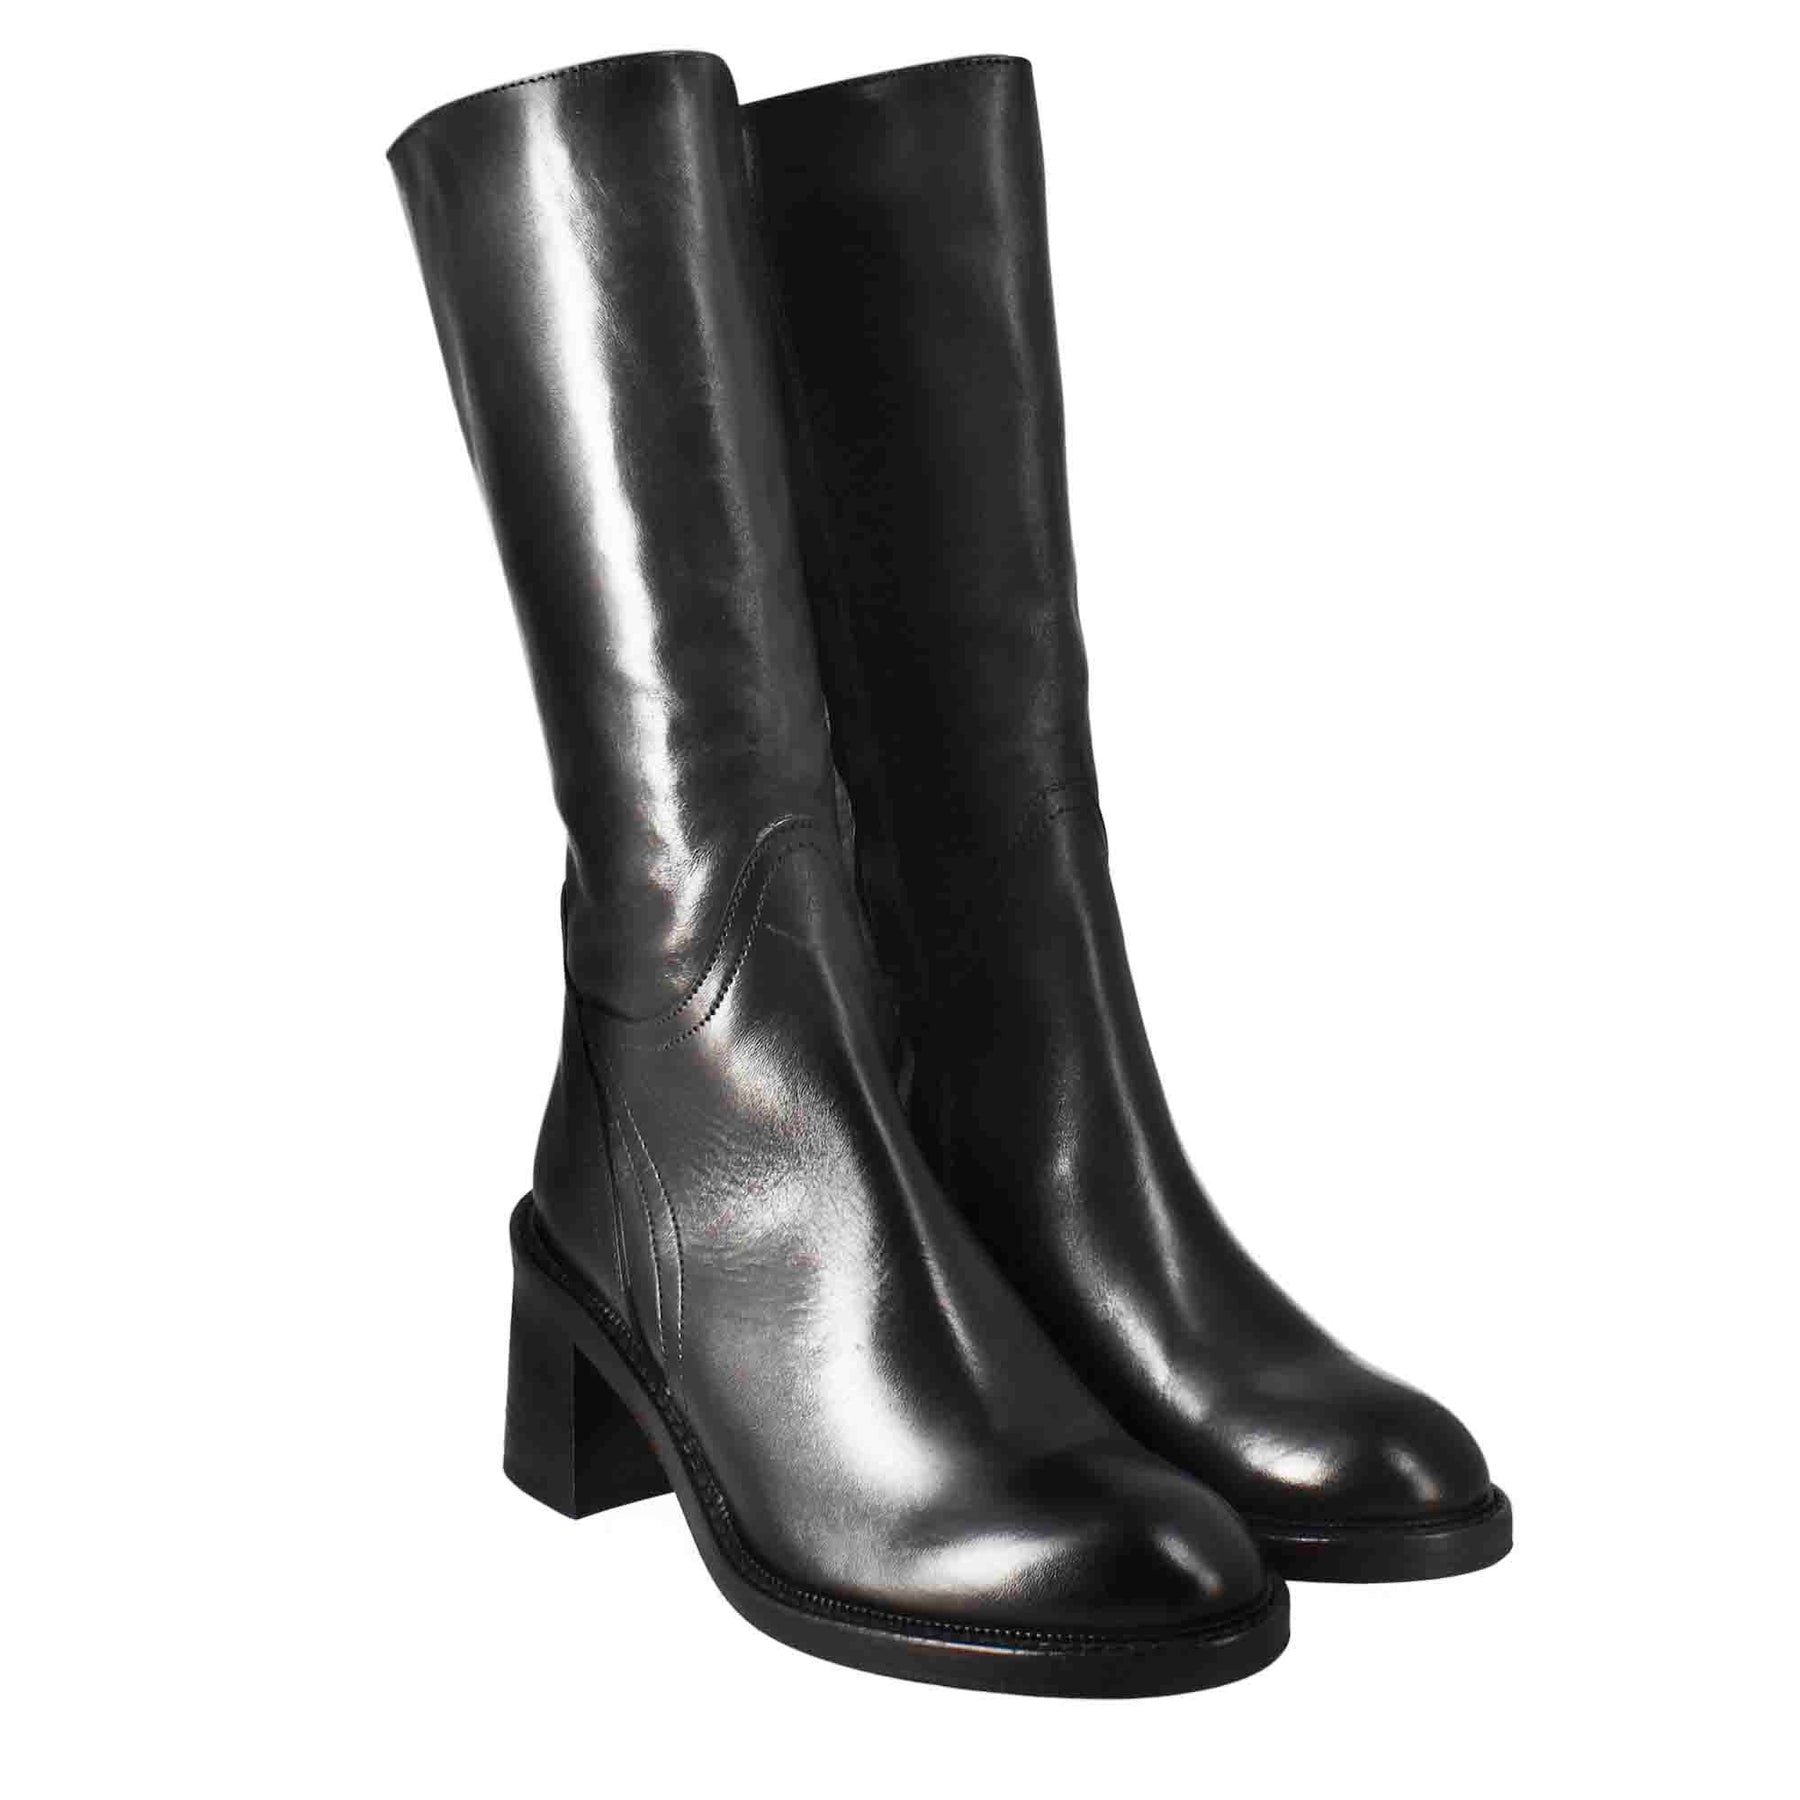 Women's calf-high diver boot with heel in black washed leather